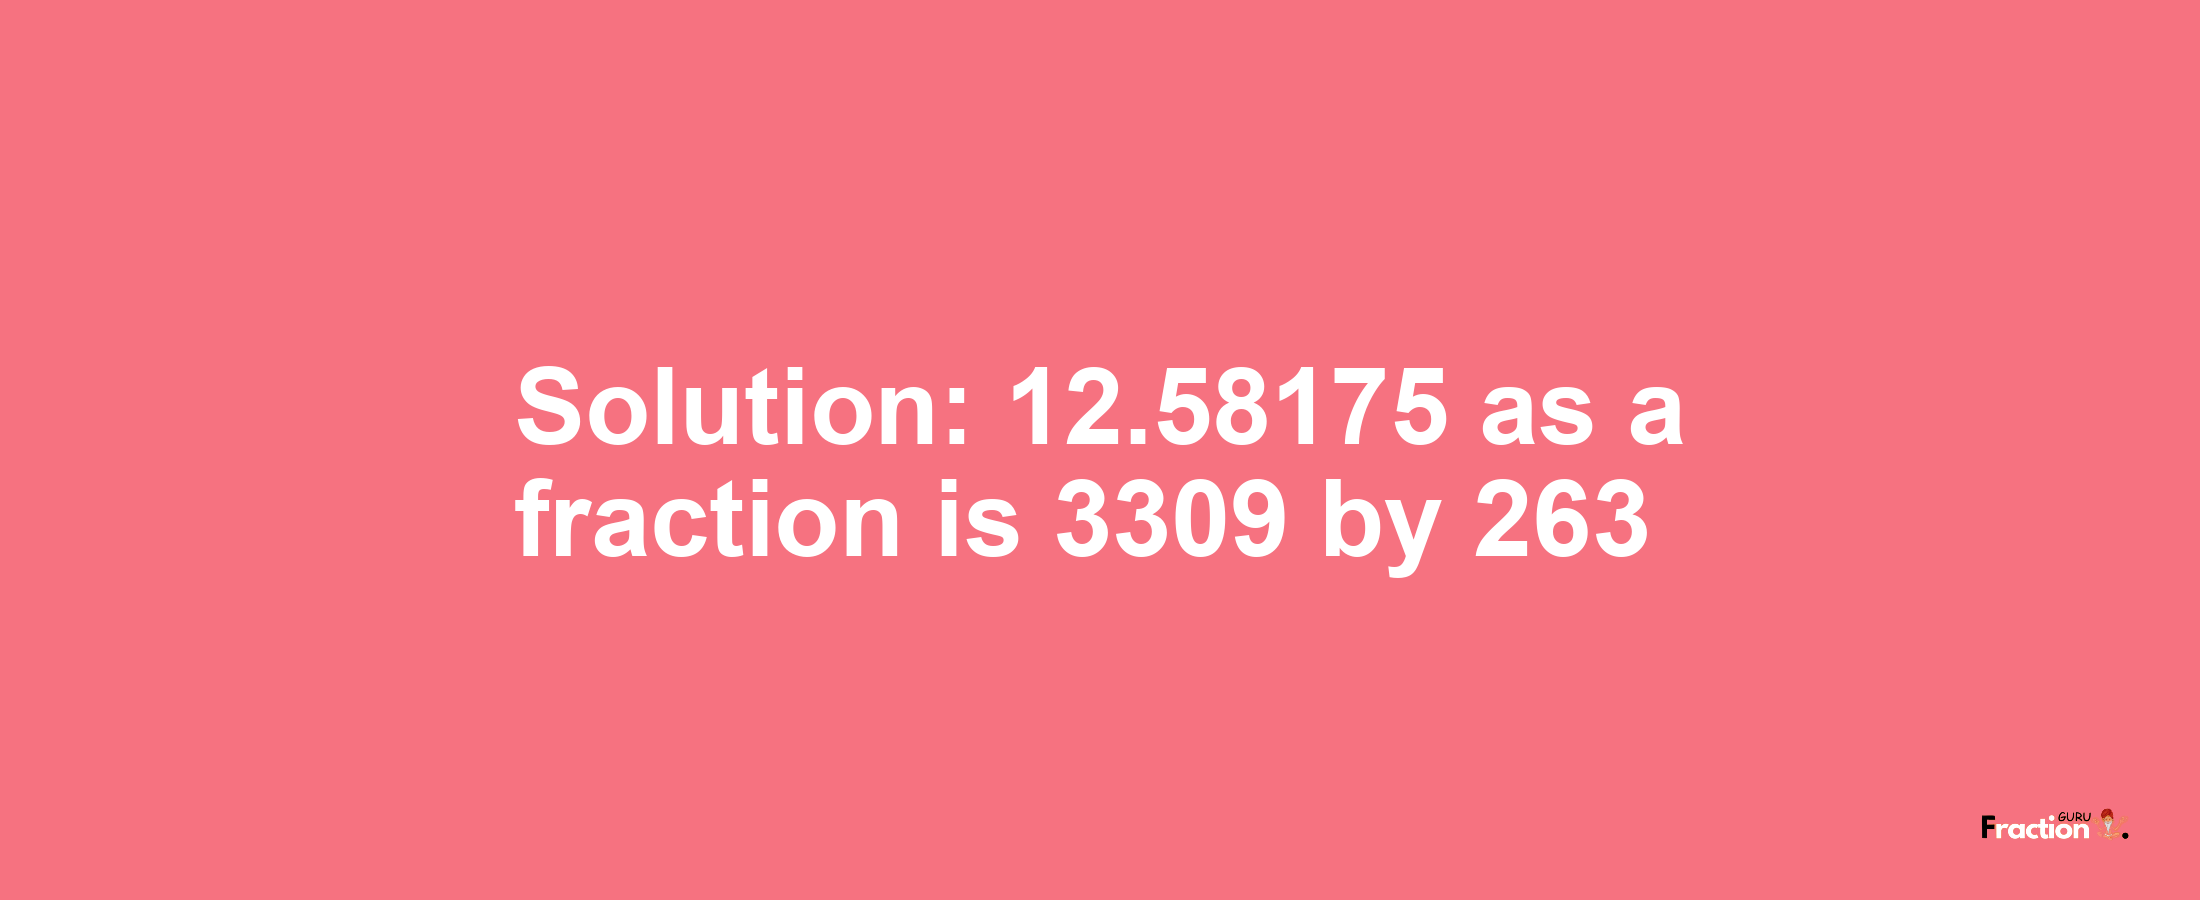 Solution:12.58175 as a fraction is 3309/263